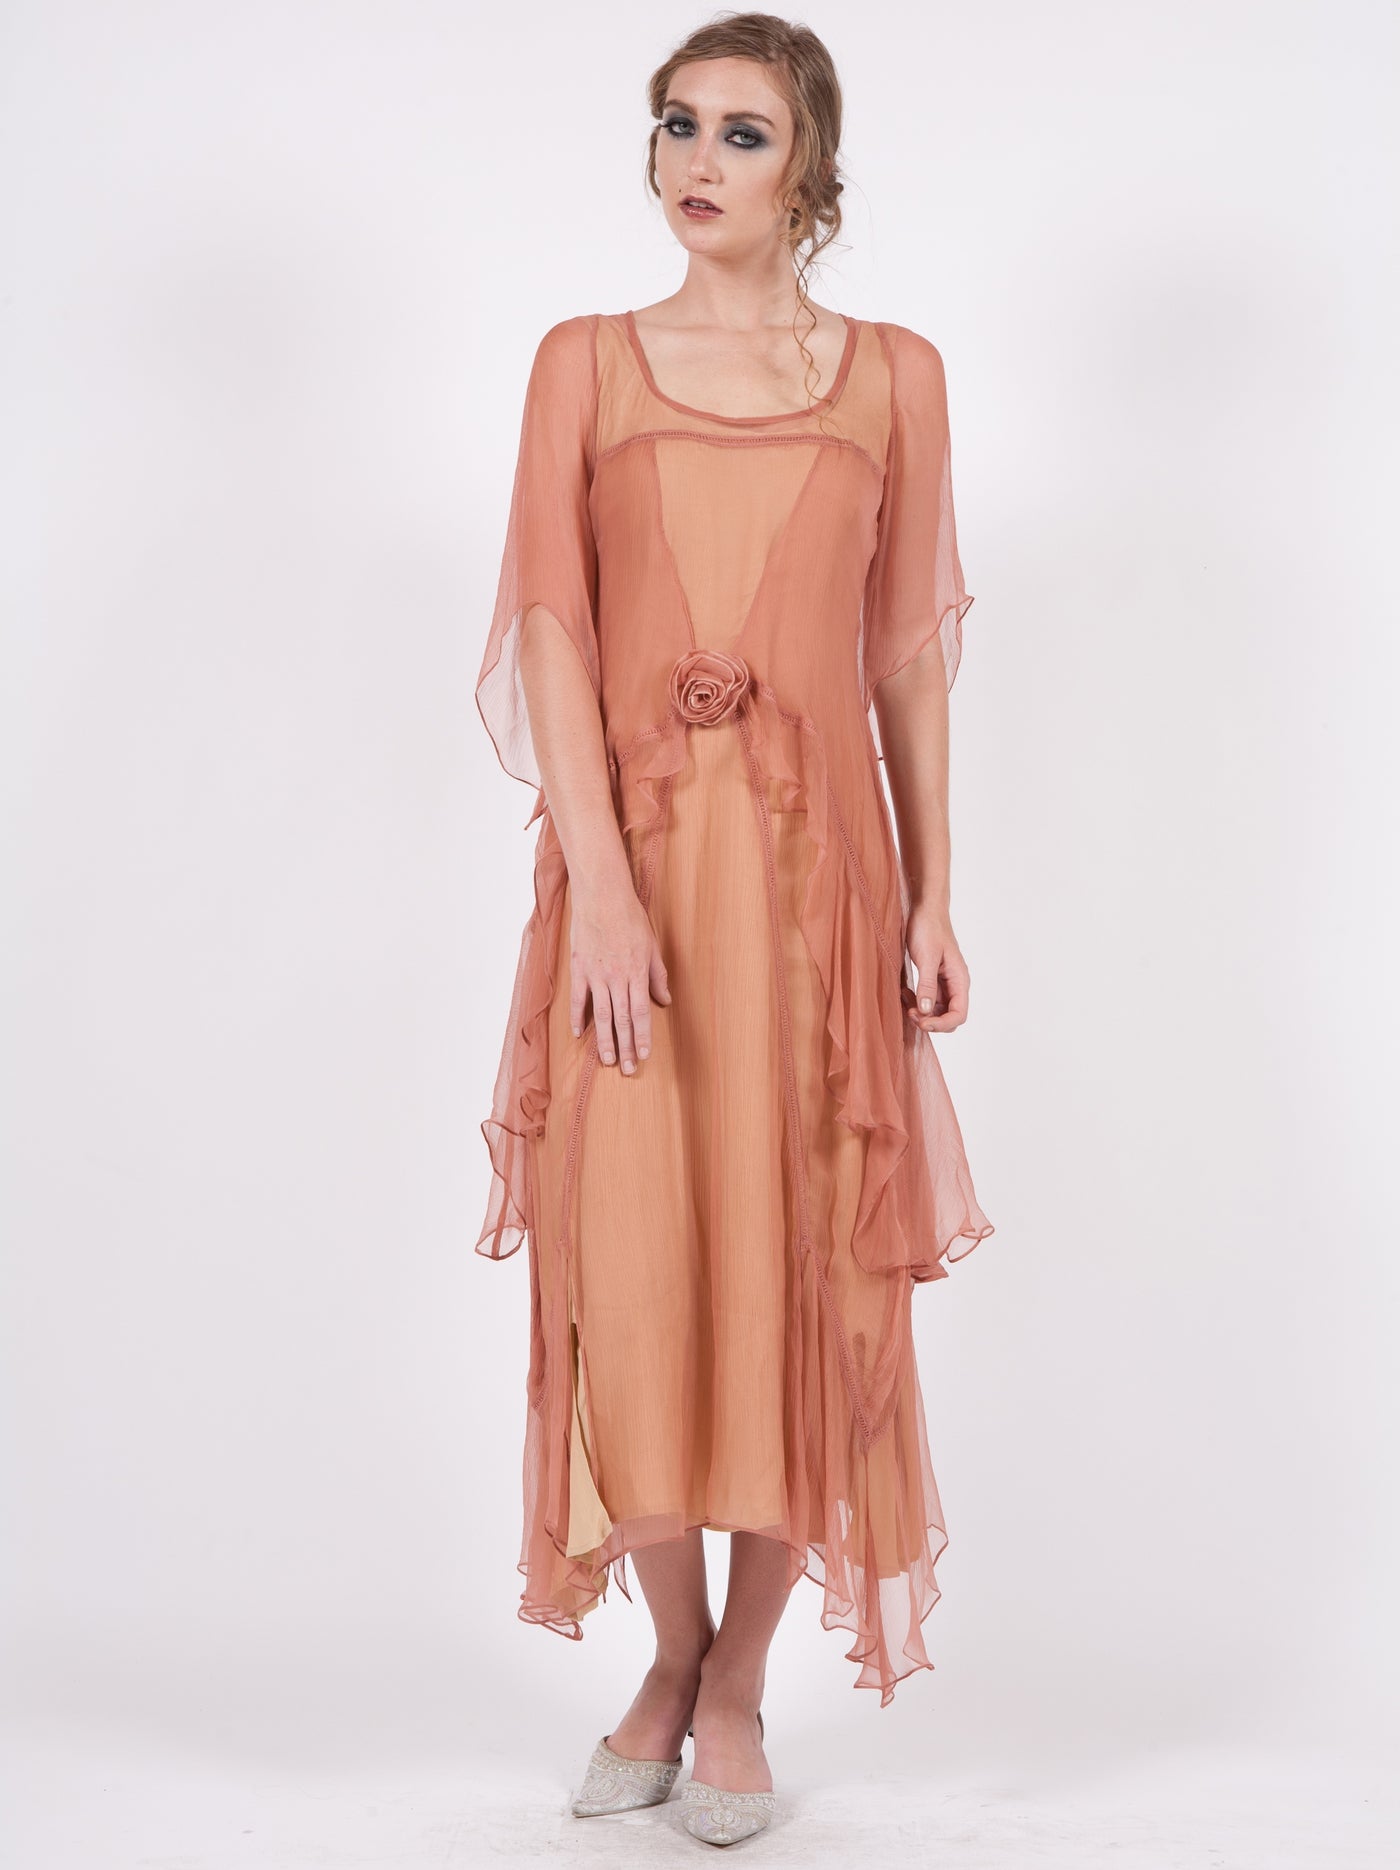 Great Gatsby Party Dress in Rose-Gold by Nataya - SOLD OUT